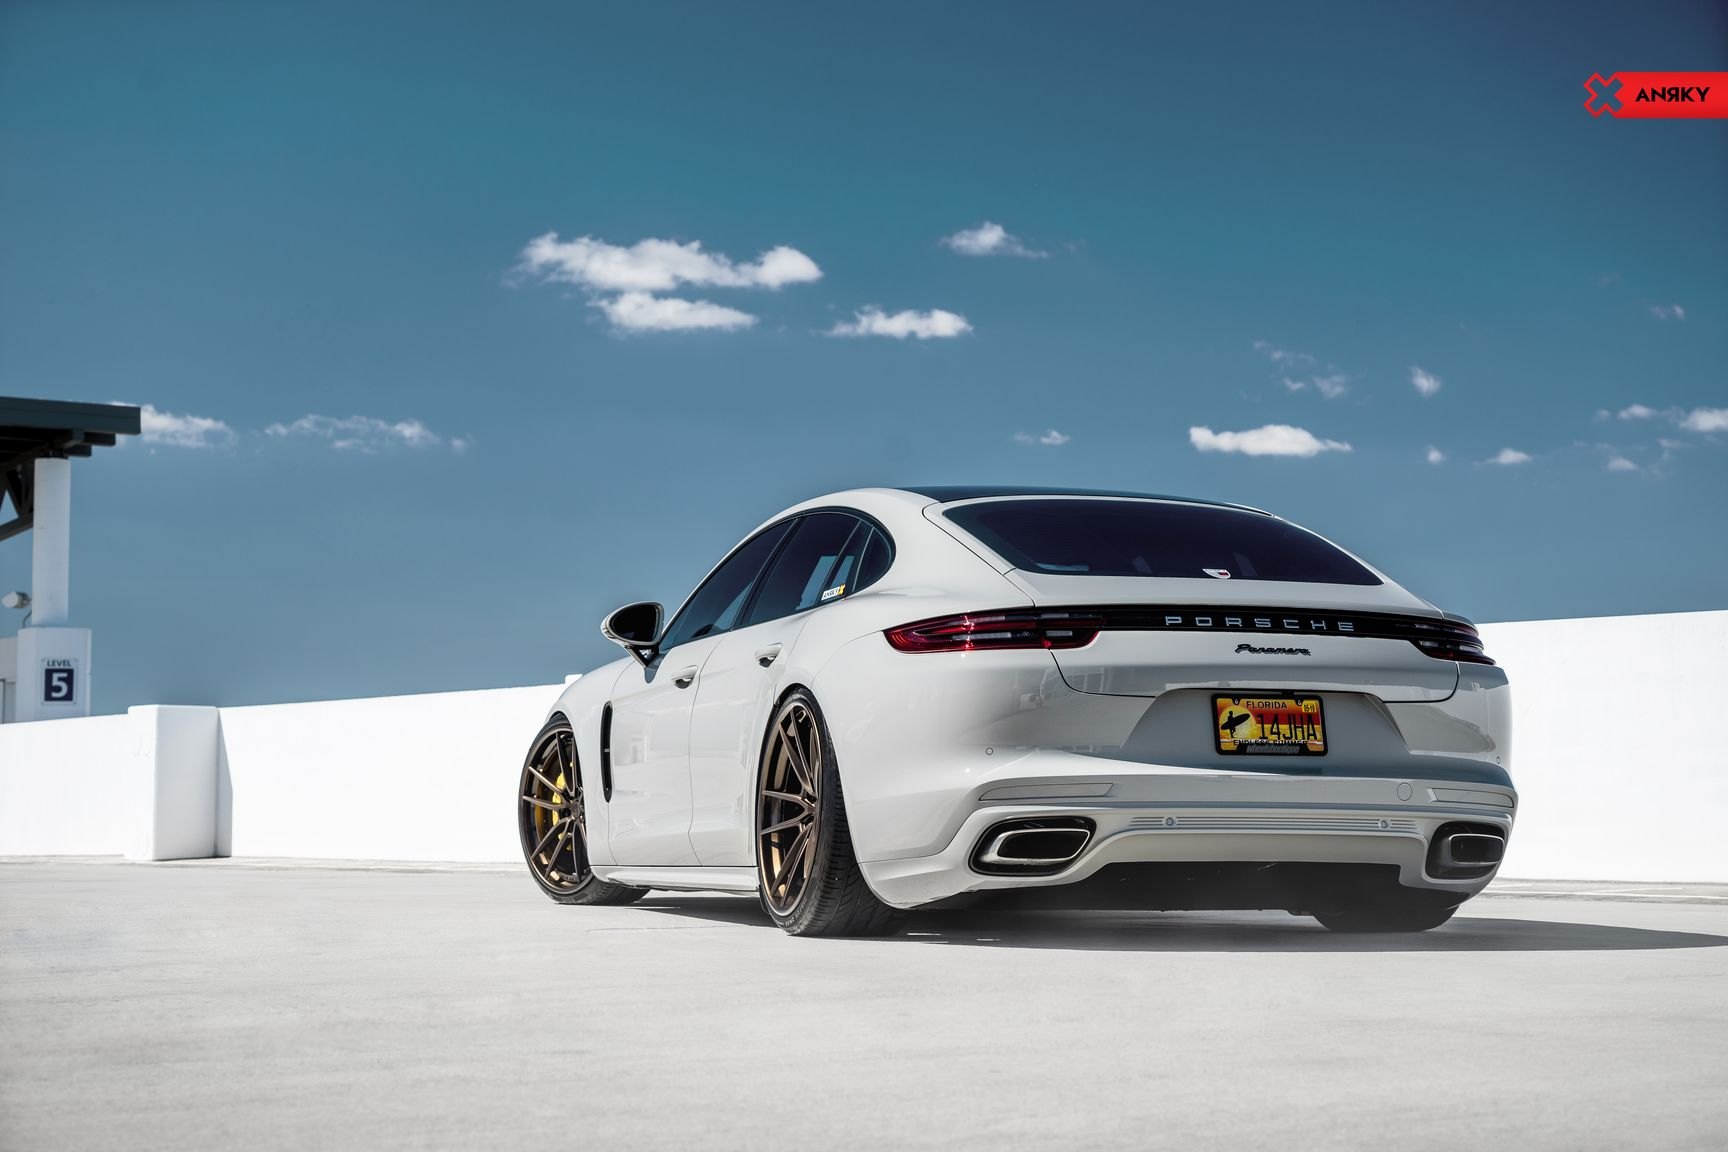 Aftermarket Rear Diffuser on Gray Porsche Panamera - Photo by Anrky Wheels